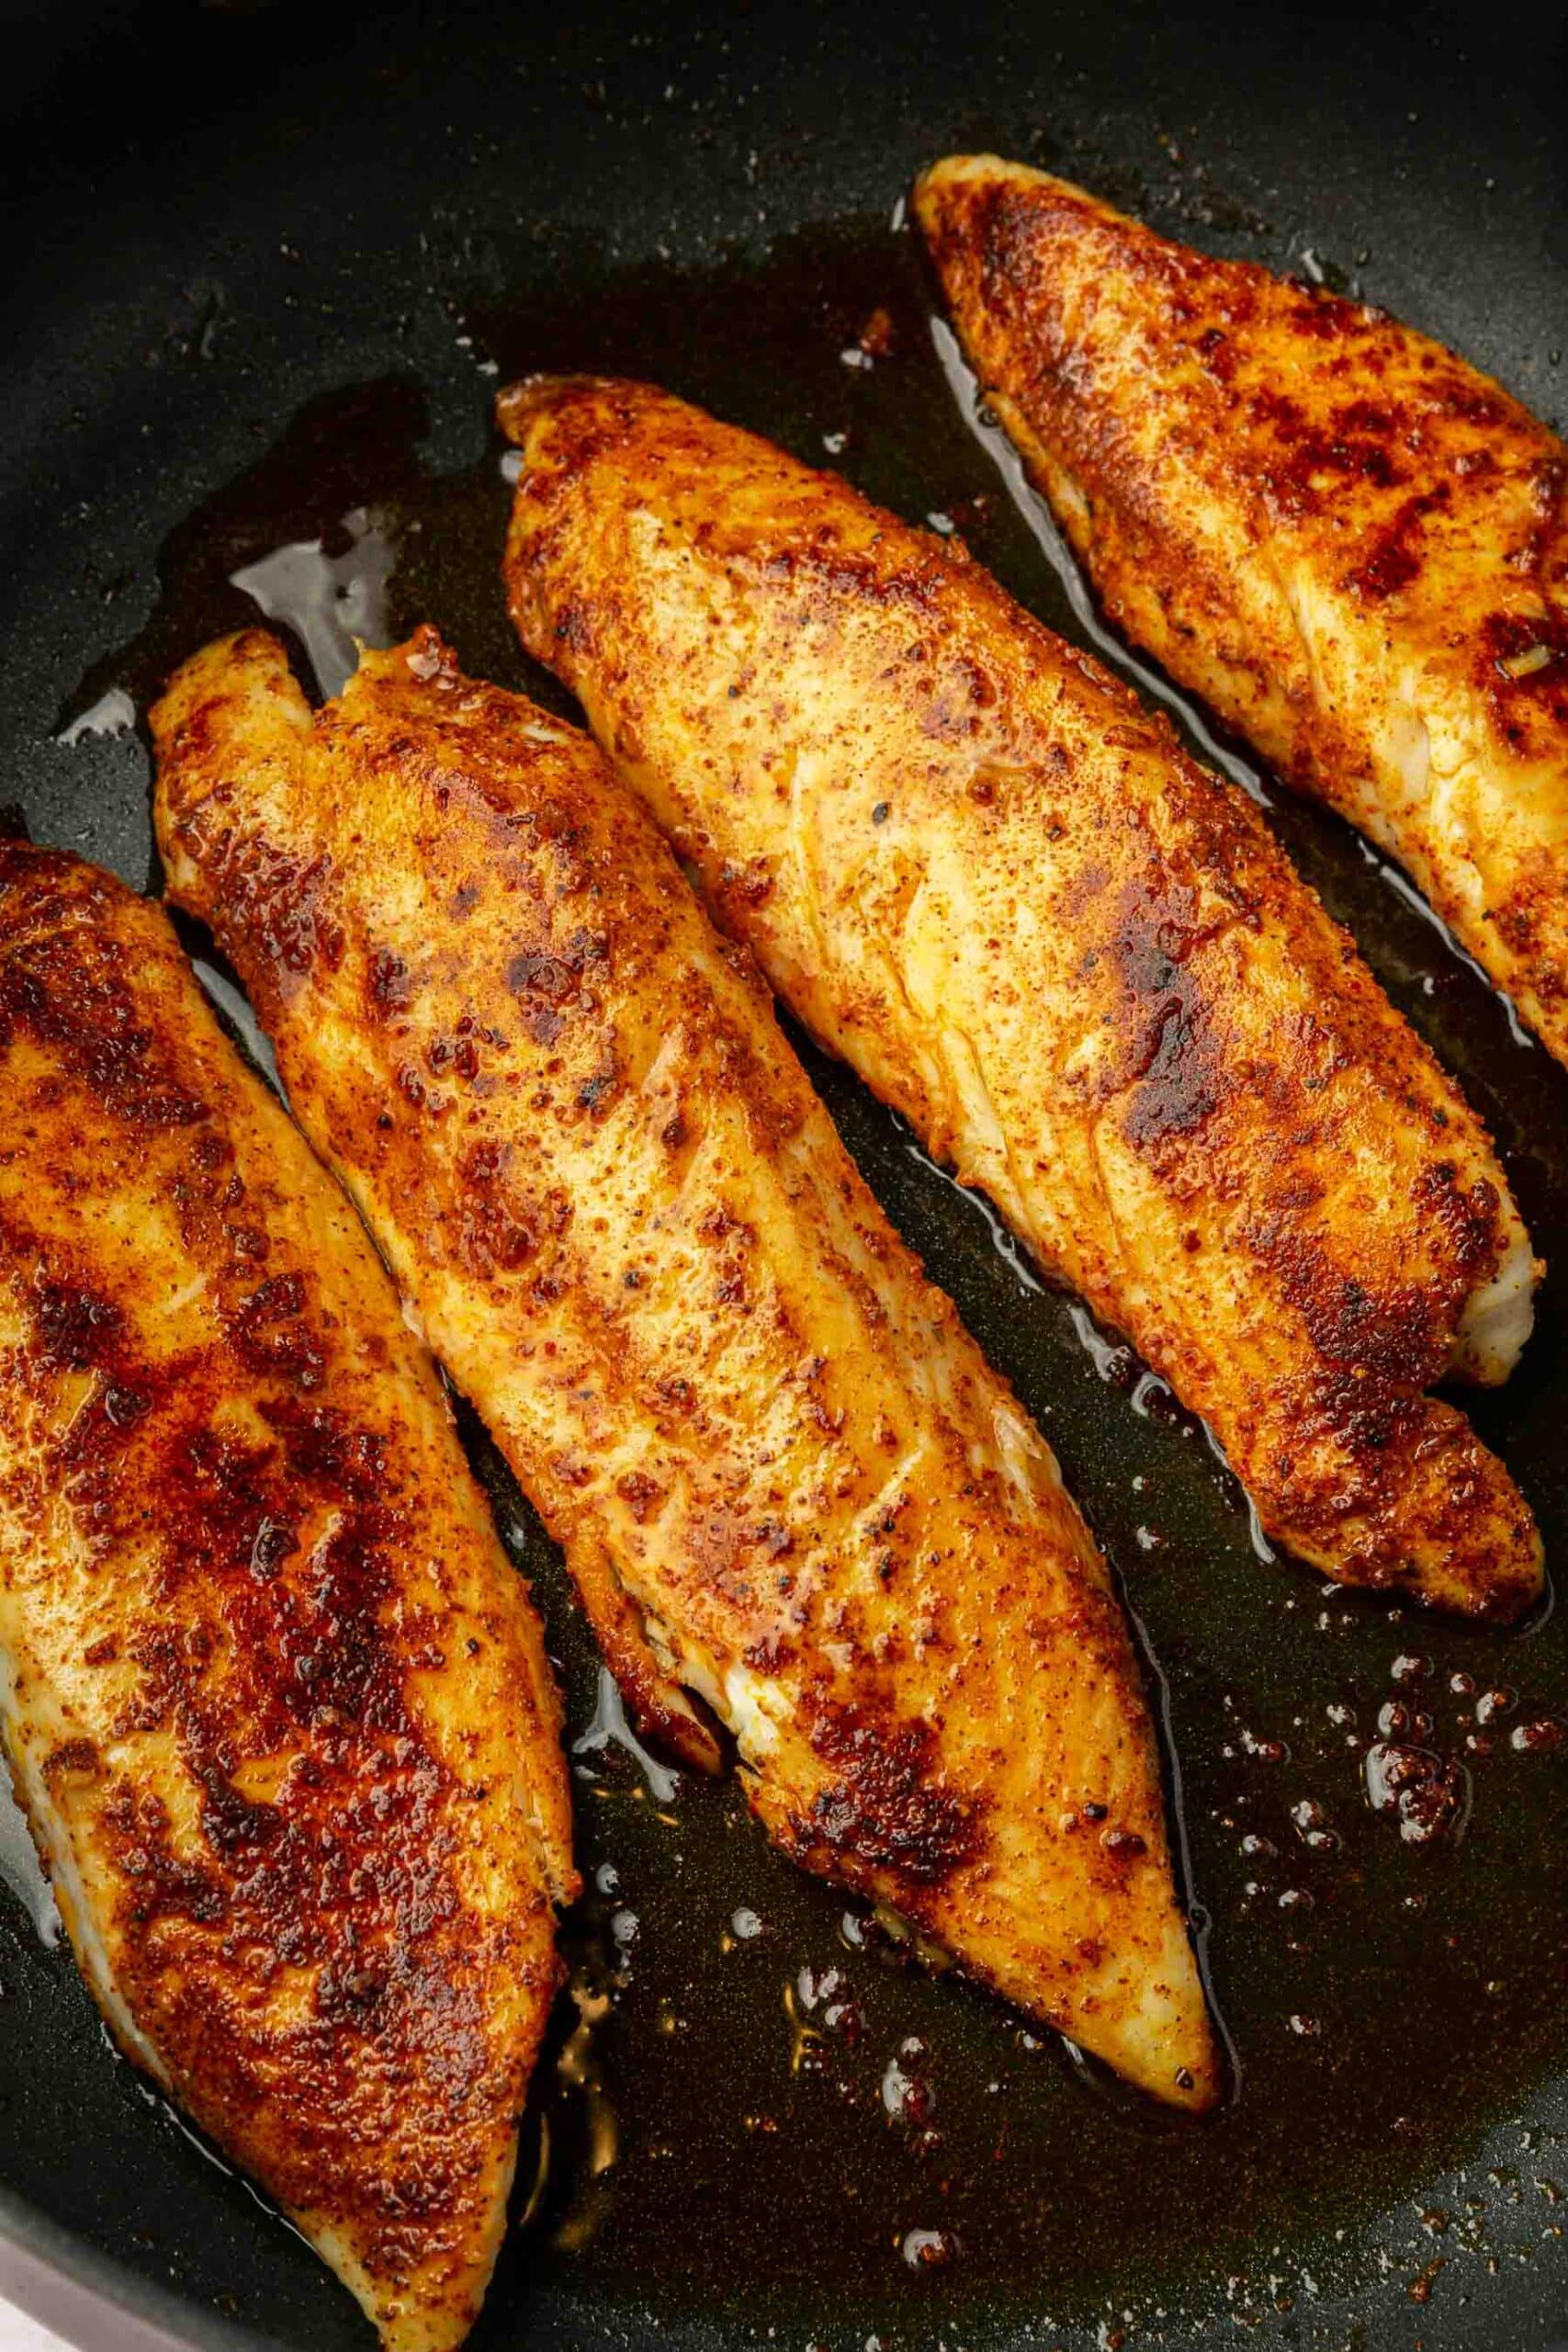 Four tilapia loin filets cooked in a non-stick skillet with oil.